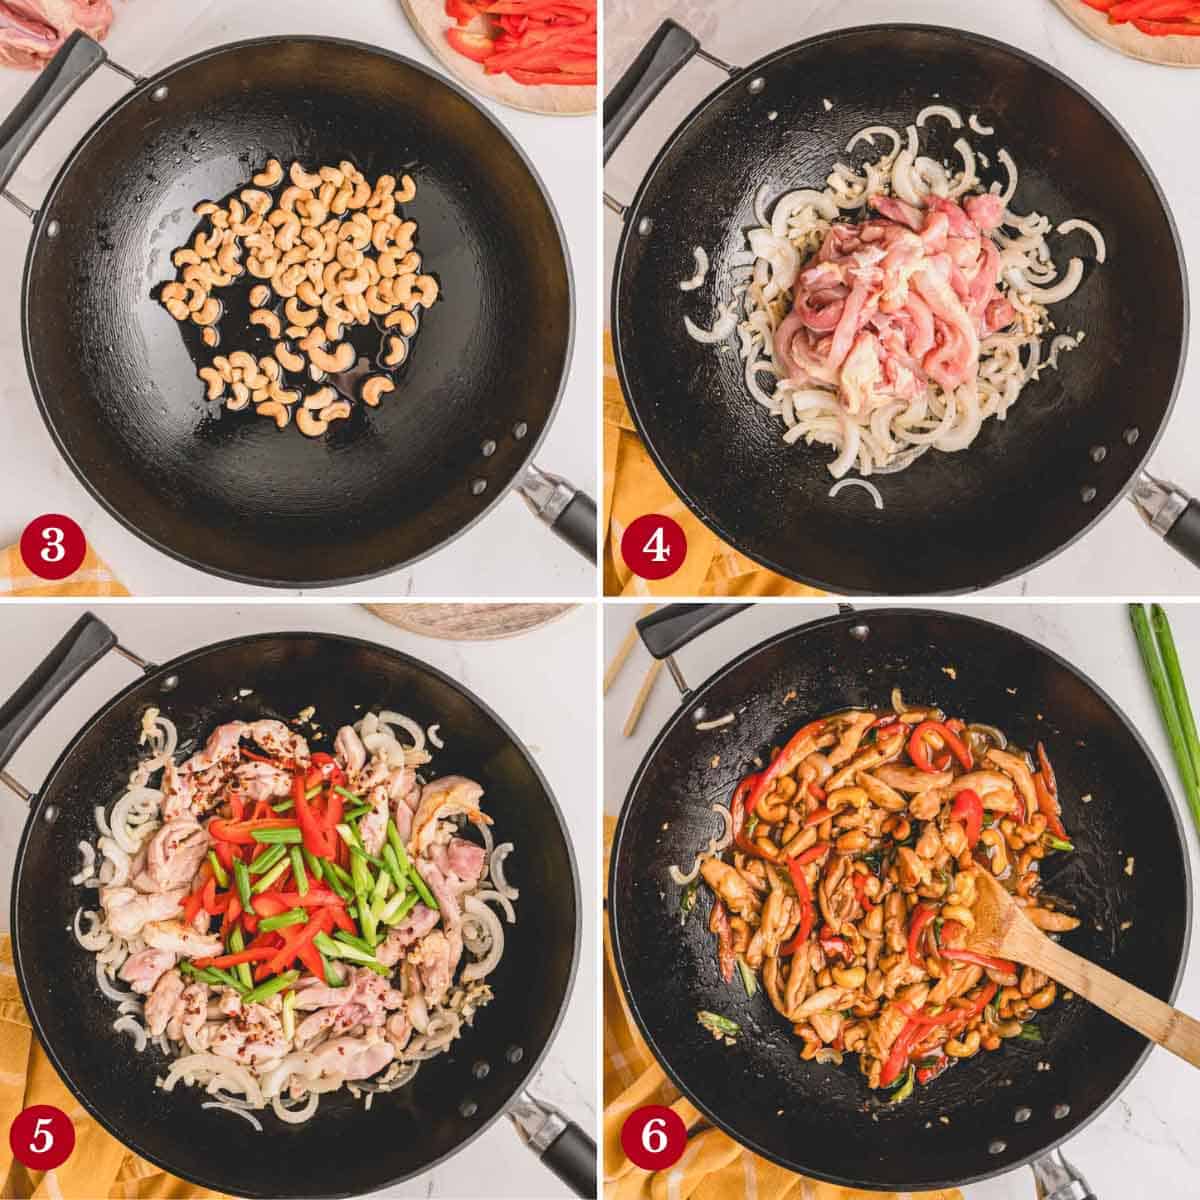 Step by step photos of making the chicken stir fry.